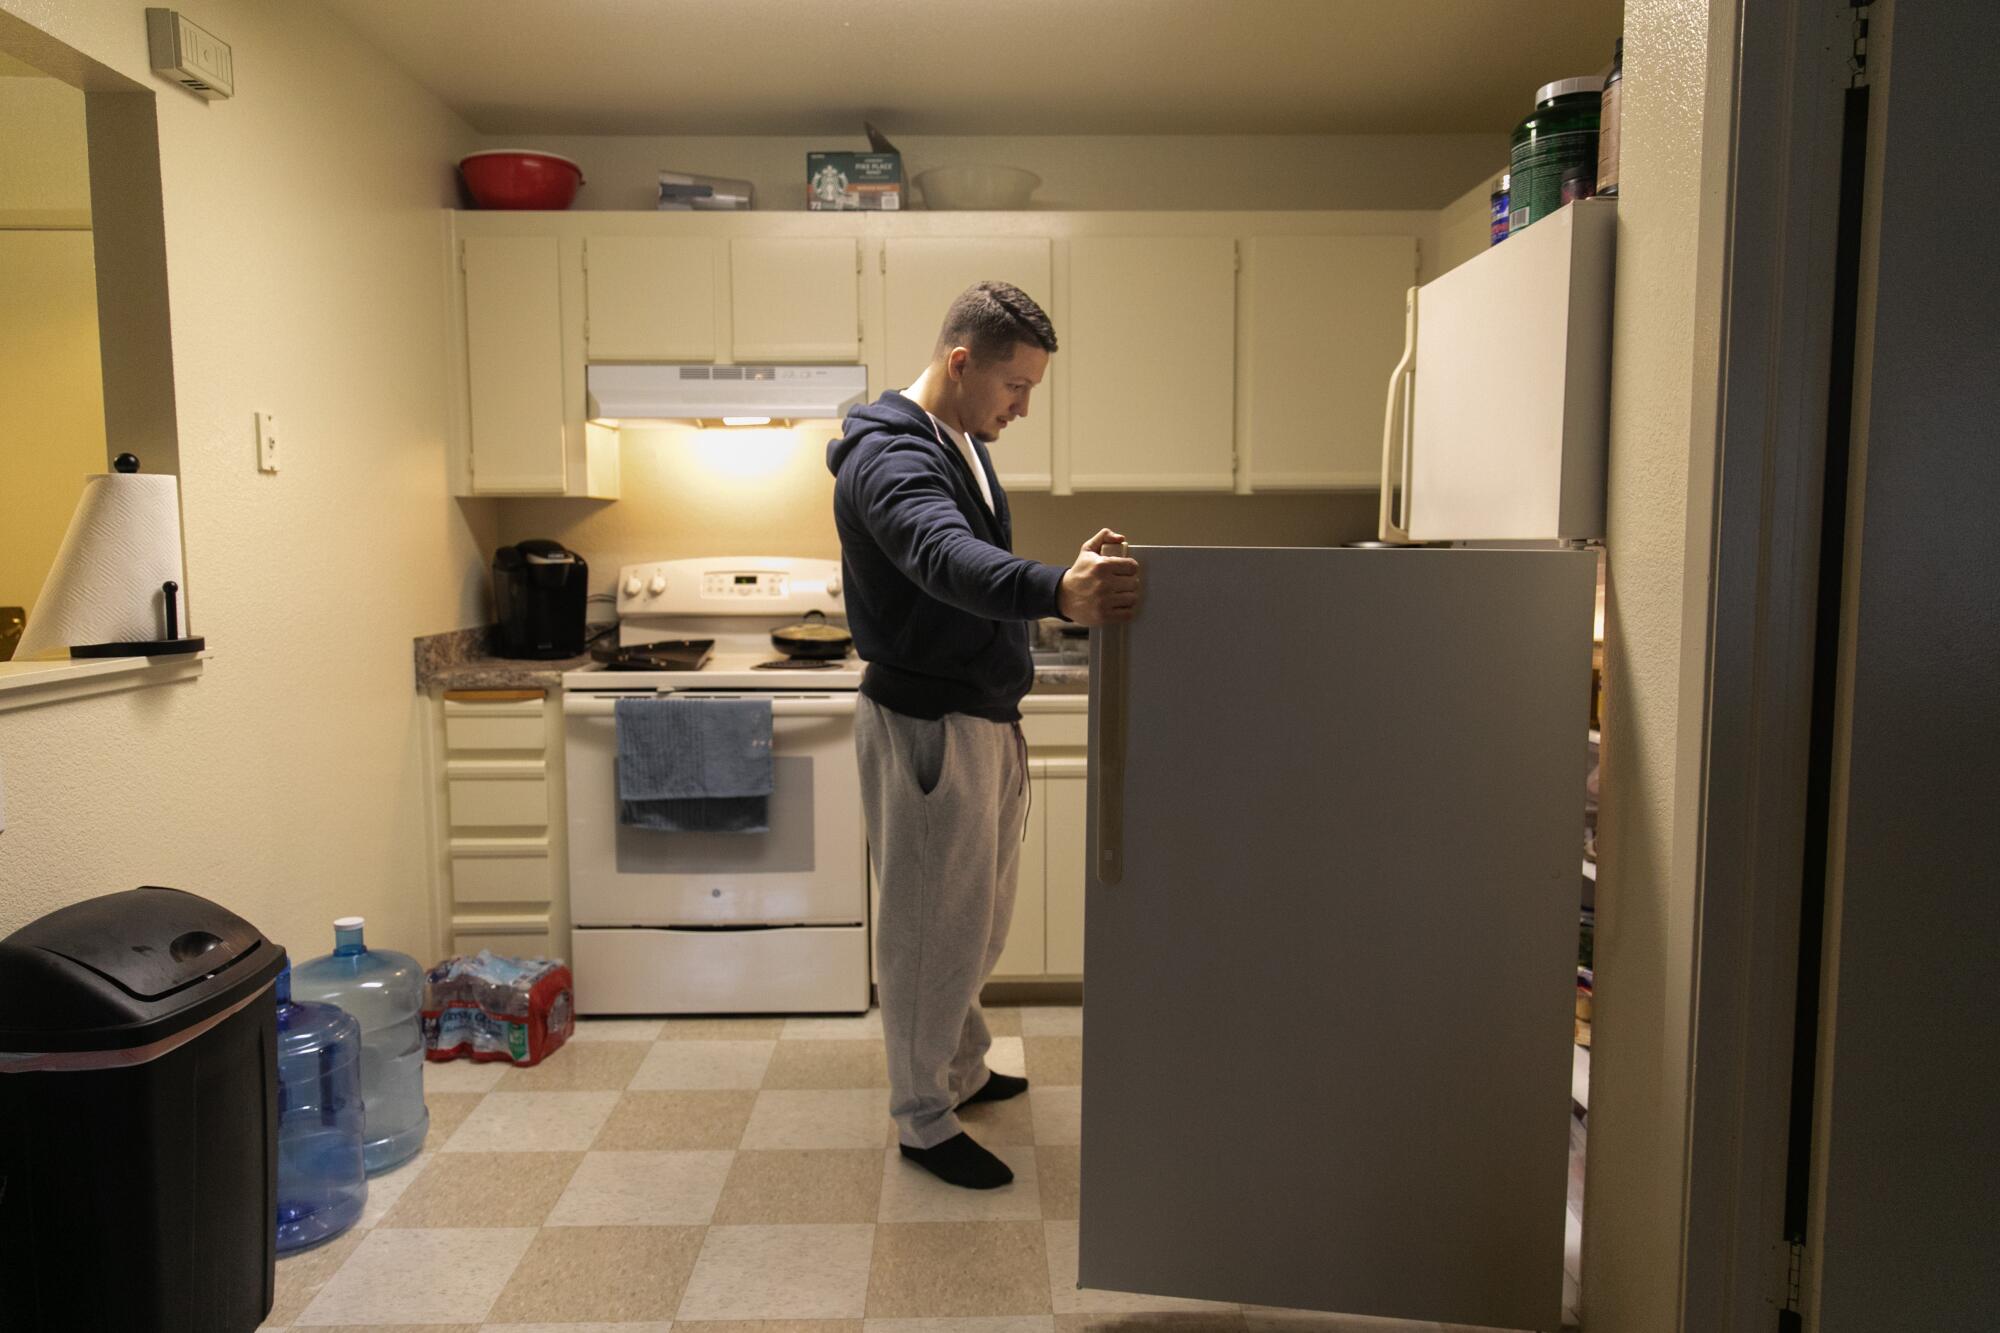 A man stands in front of an open refrigerator in a kitchen.